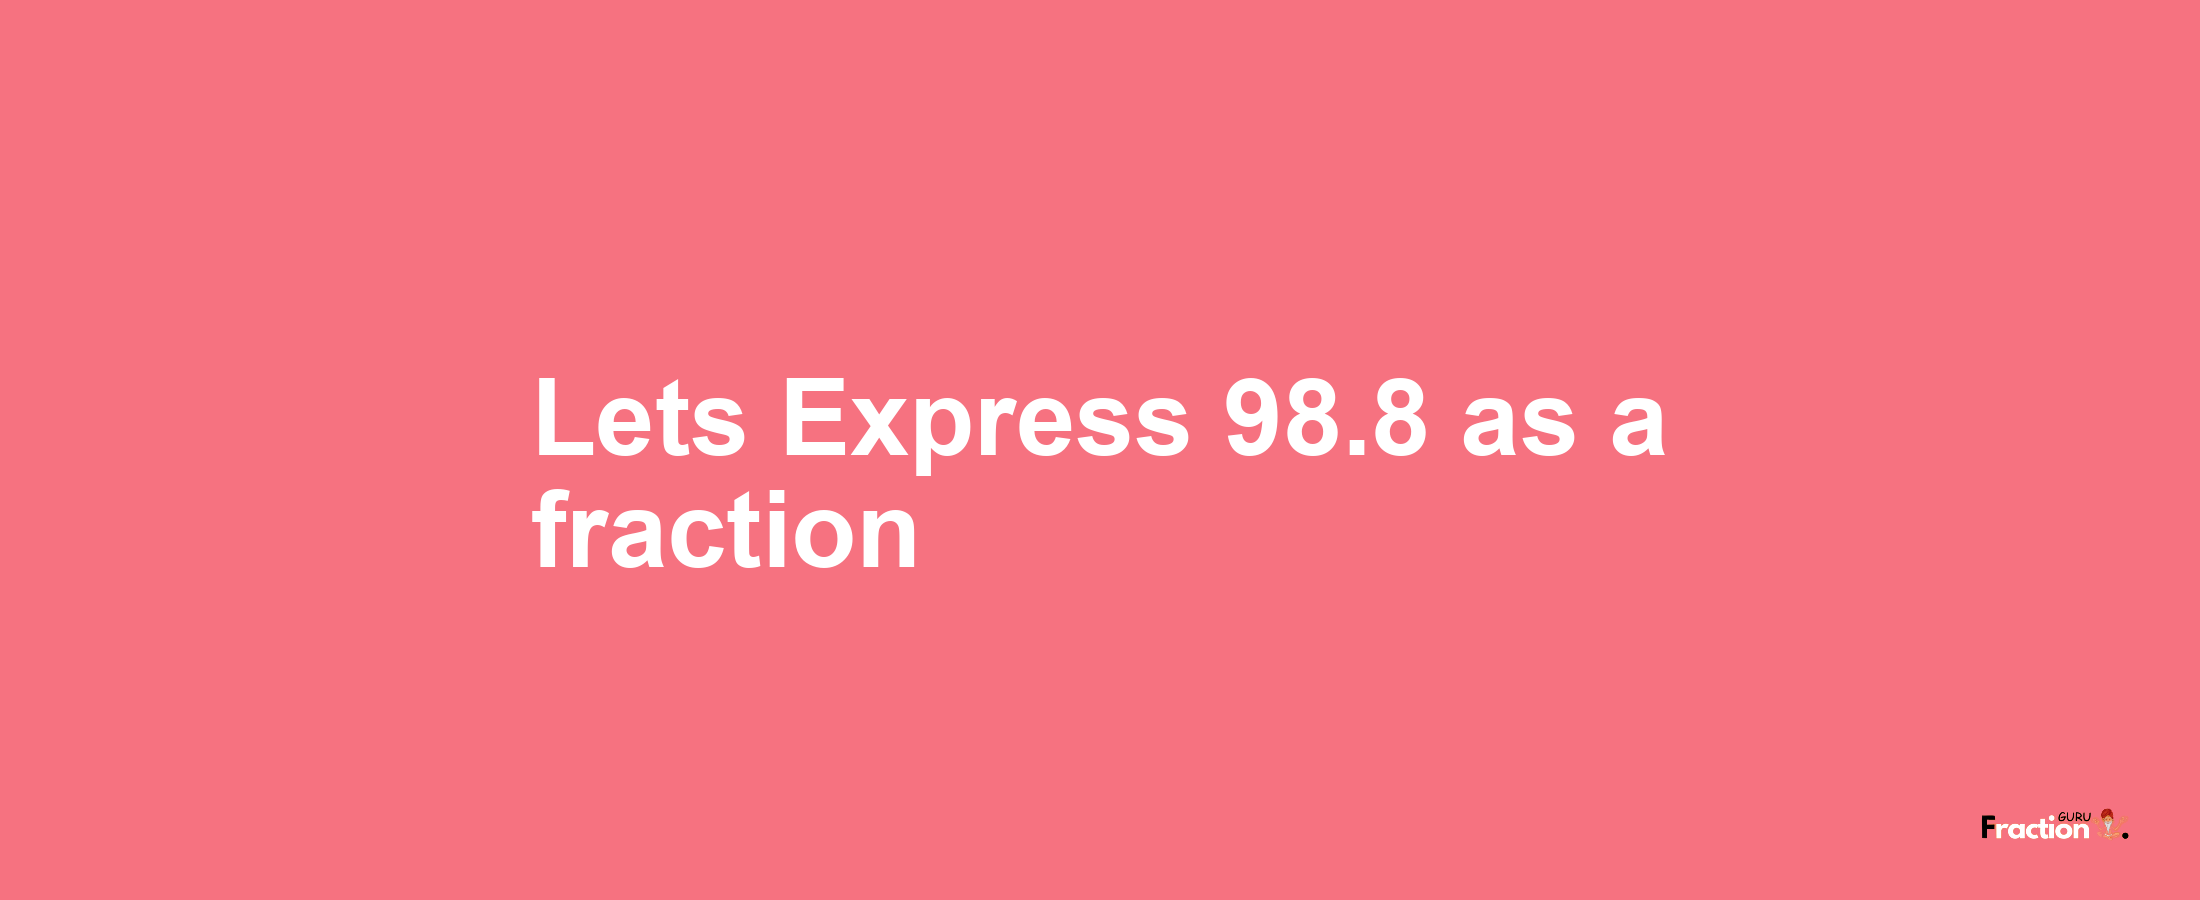 Lets Express 98.8 as afraction